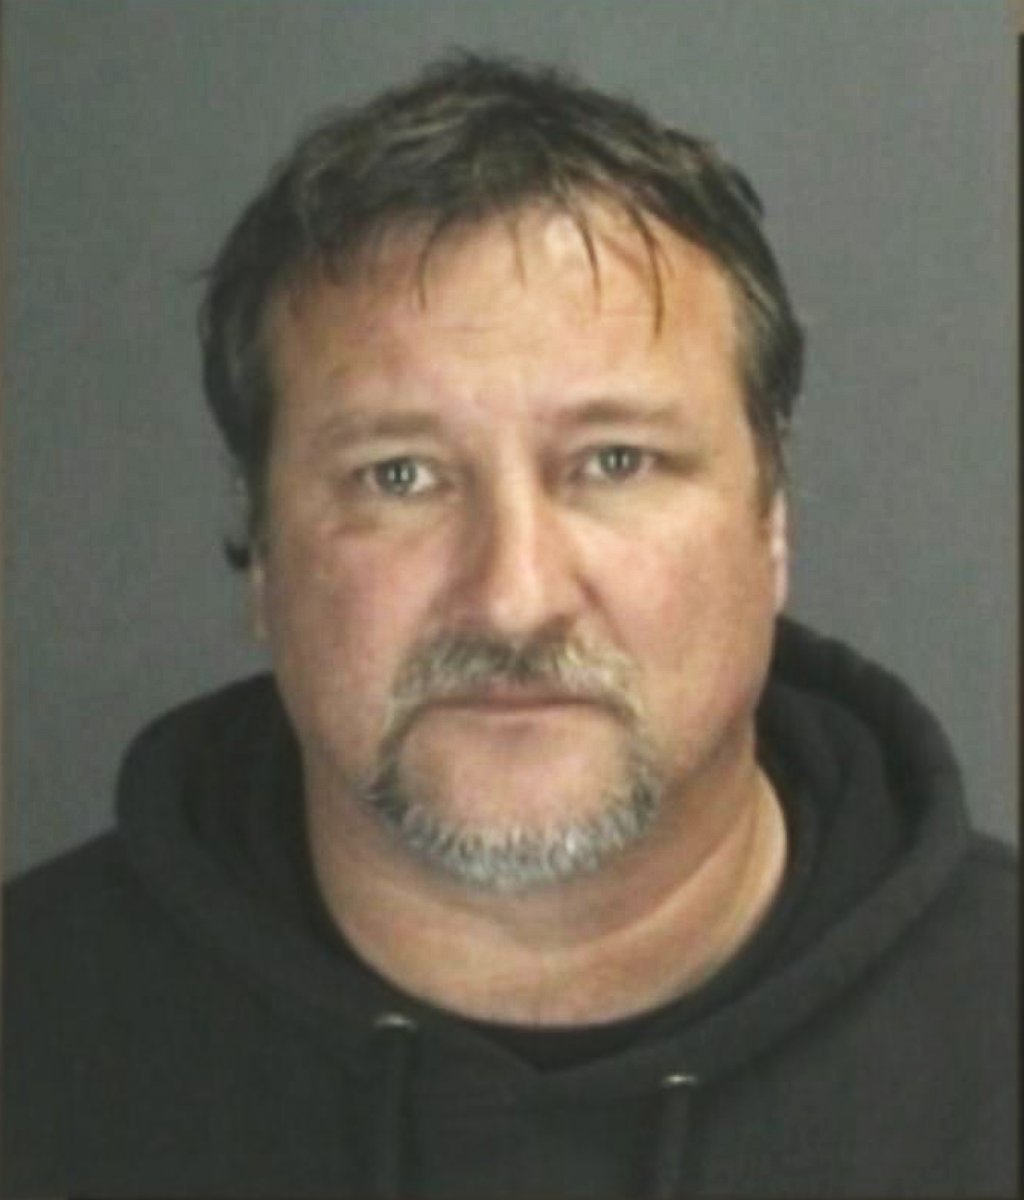 PHOTO: James Rhein allegedly bulldozed a home that belonged to his wife.